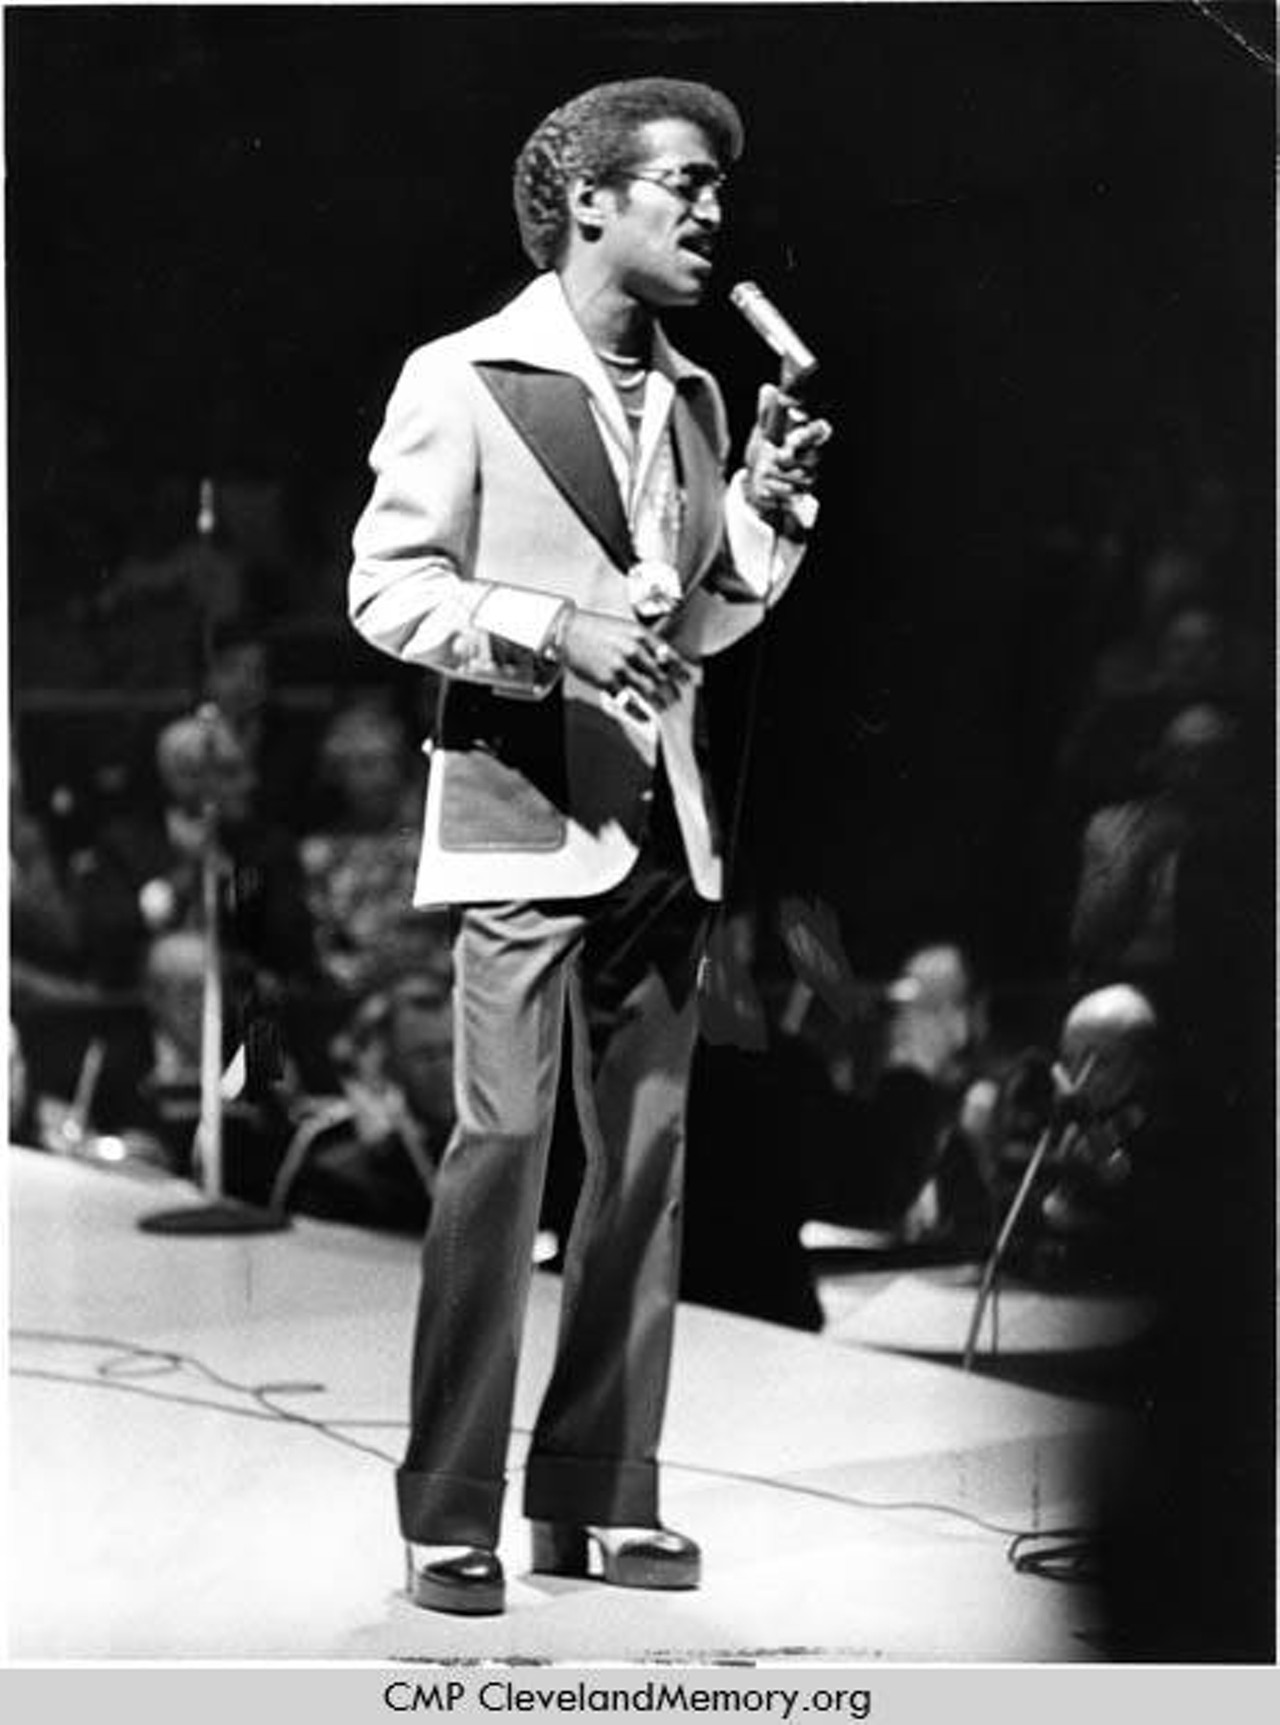 Sammy Davis Jr. on stage at Front Row Theater, 1974